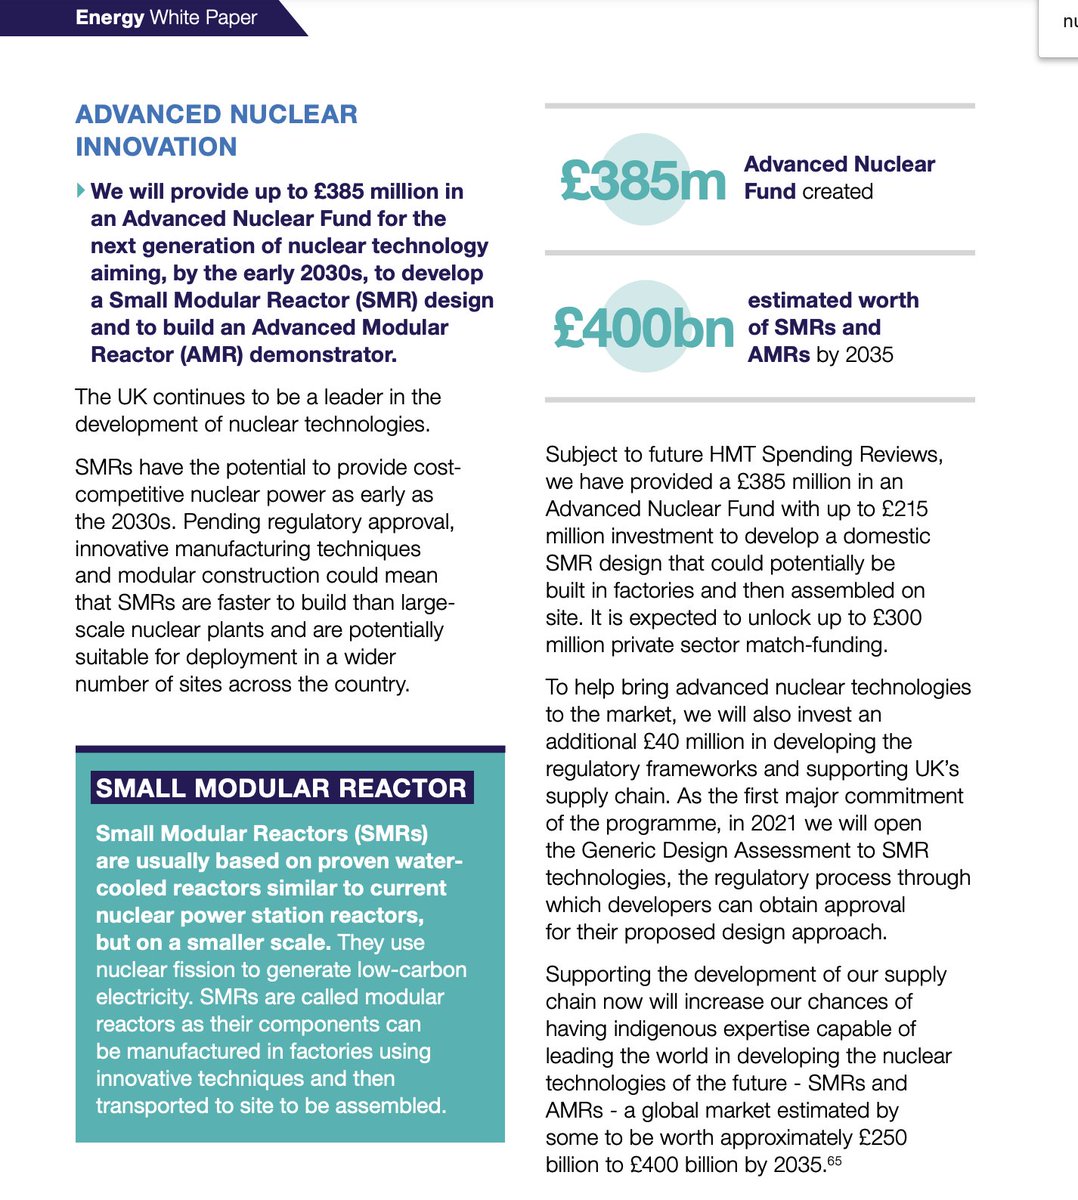 7. Quite a bit on SMRs and Advanced Modular Reactors (AMRs) - screenshots for ease of reference. All good stuff. Obviously we would like to see more urgency appropriate to the scale and timescales of the climate challenge, but let's be grateful for important steps taken today.